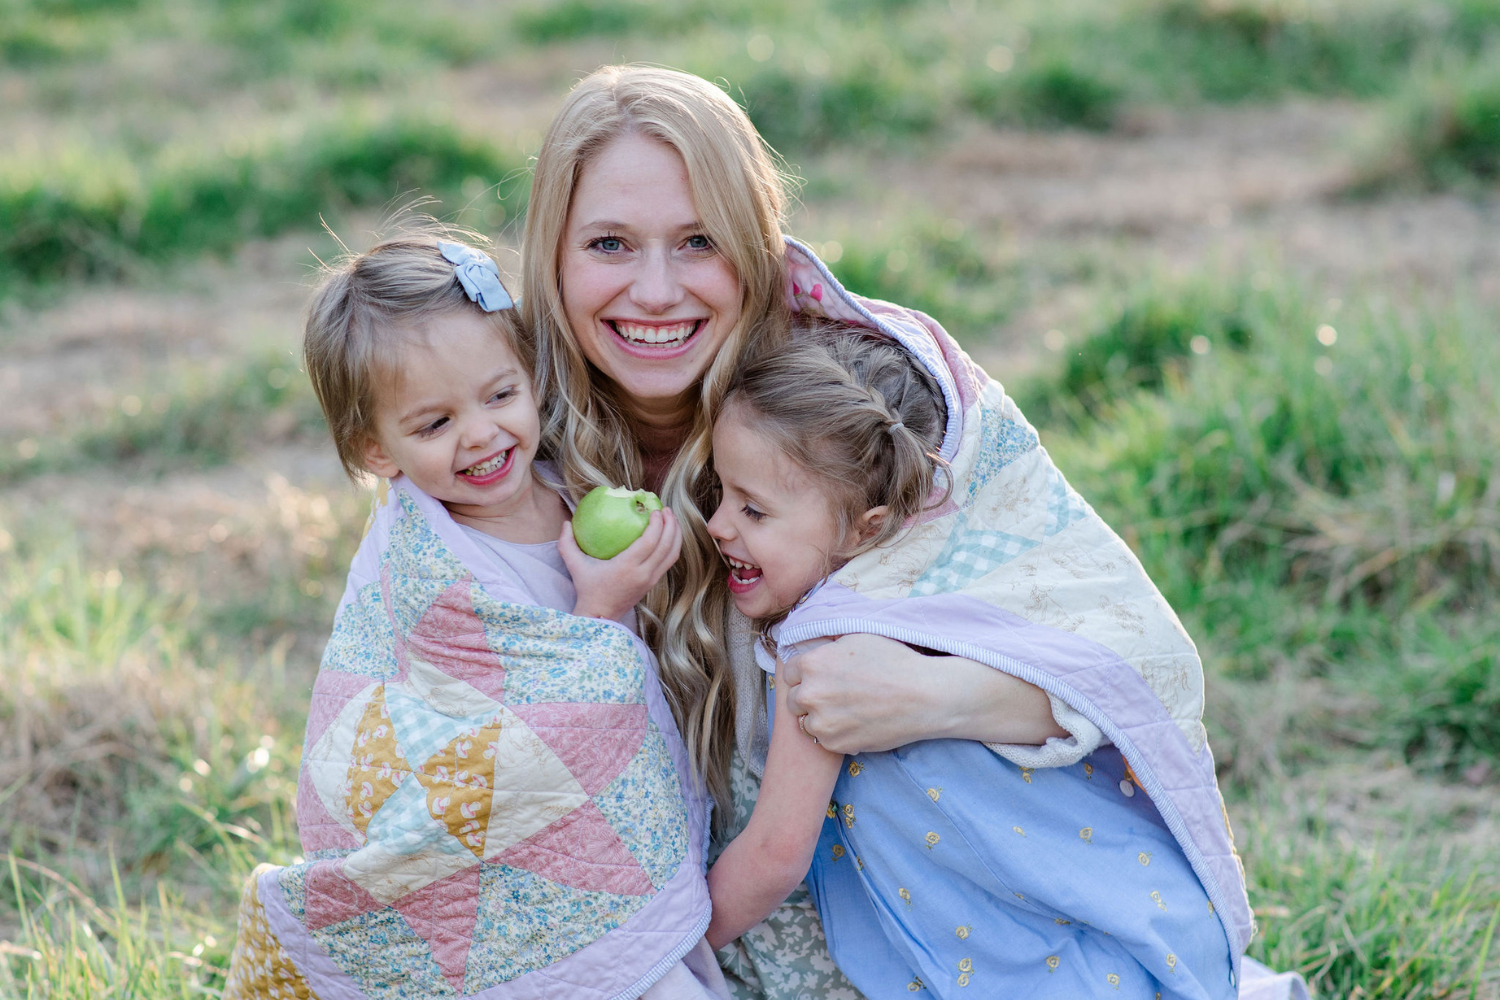 Michelle Collins and her two daughters are smiling and wrapped in a quilt comprised of small triangle blocks, some are blue and yellow floral, some are pink, some are white. The quilt has a thick lavender border. They are in a grassy field.